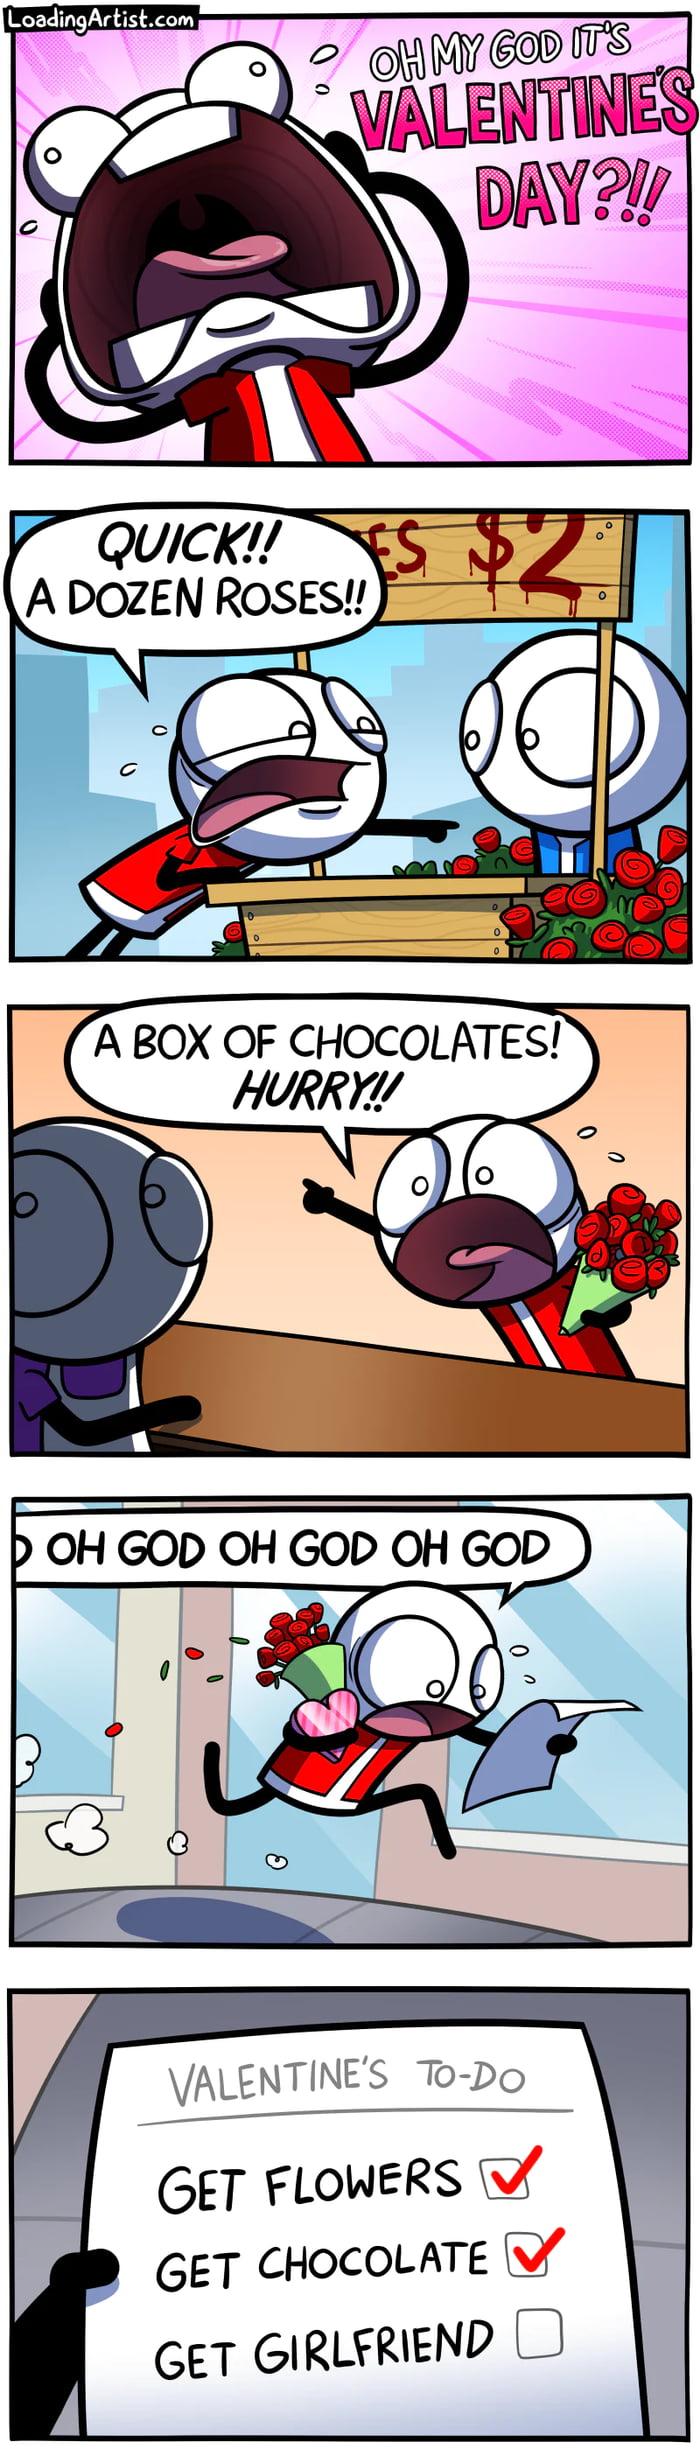 Every valentines day